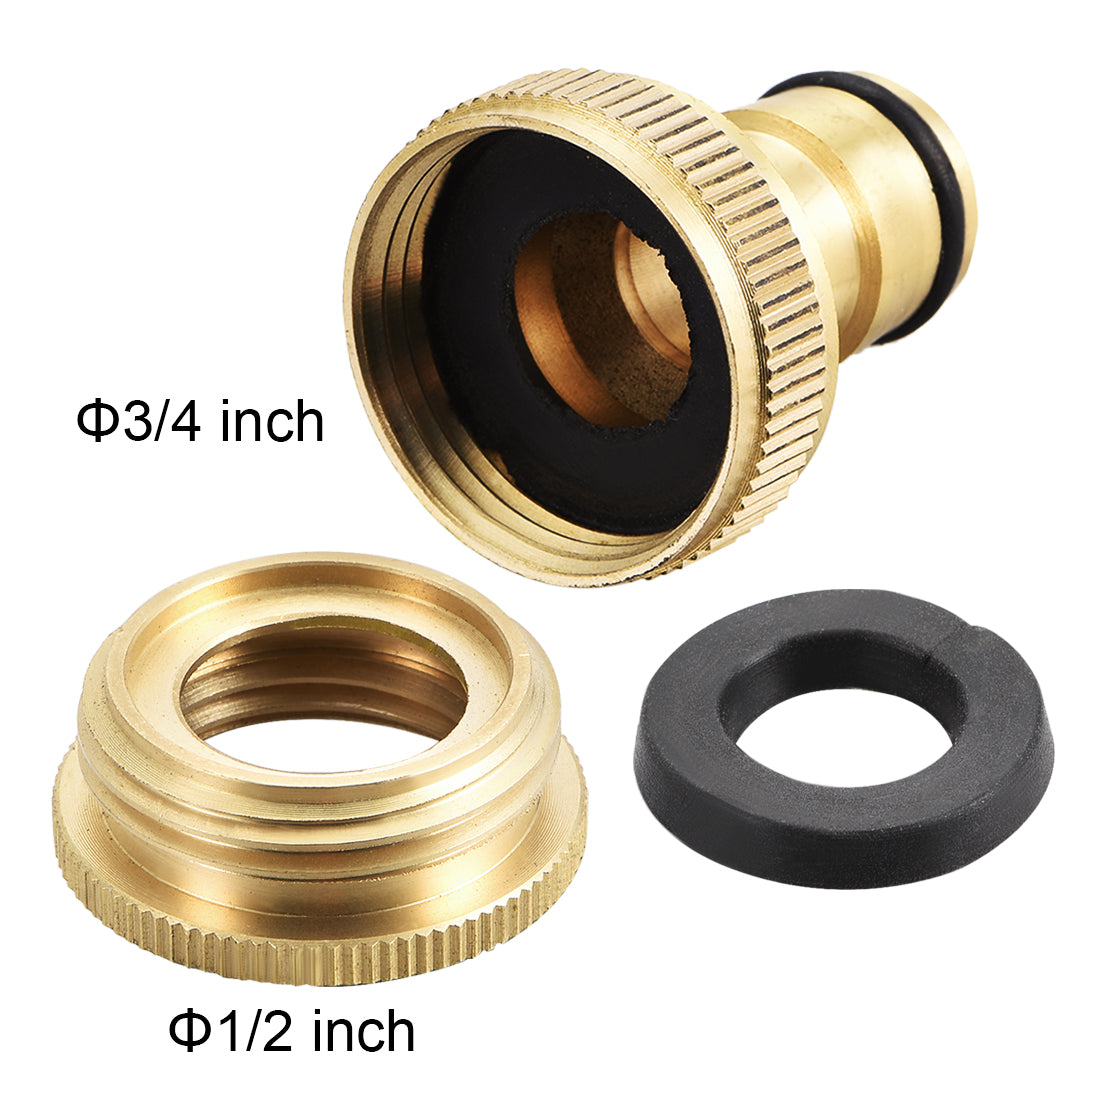 uxcell Uxcell 2-in-1 Brass Quick Connector G 1/2 to G 3/4 Female Pipe Fitting Adapter Garden Hose  2pcs